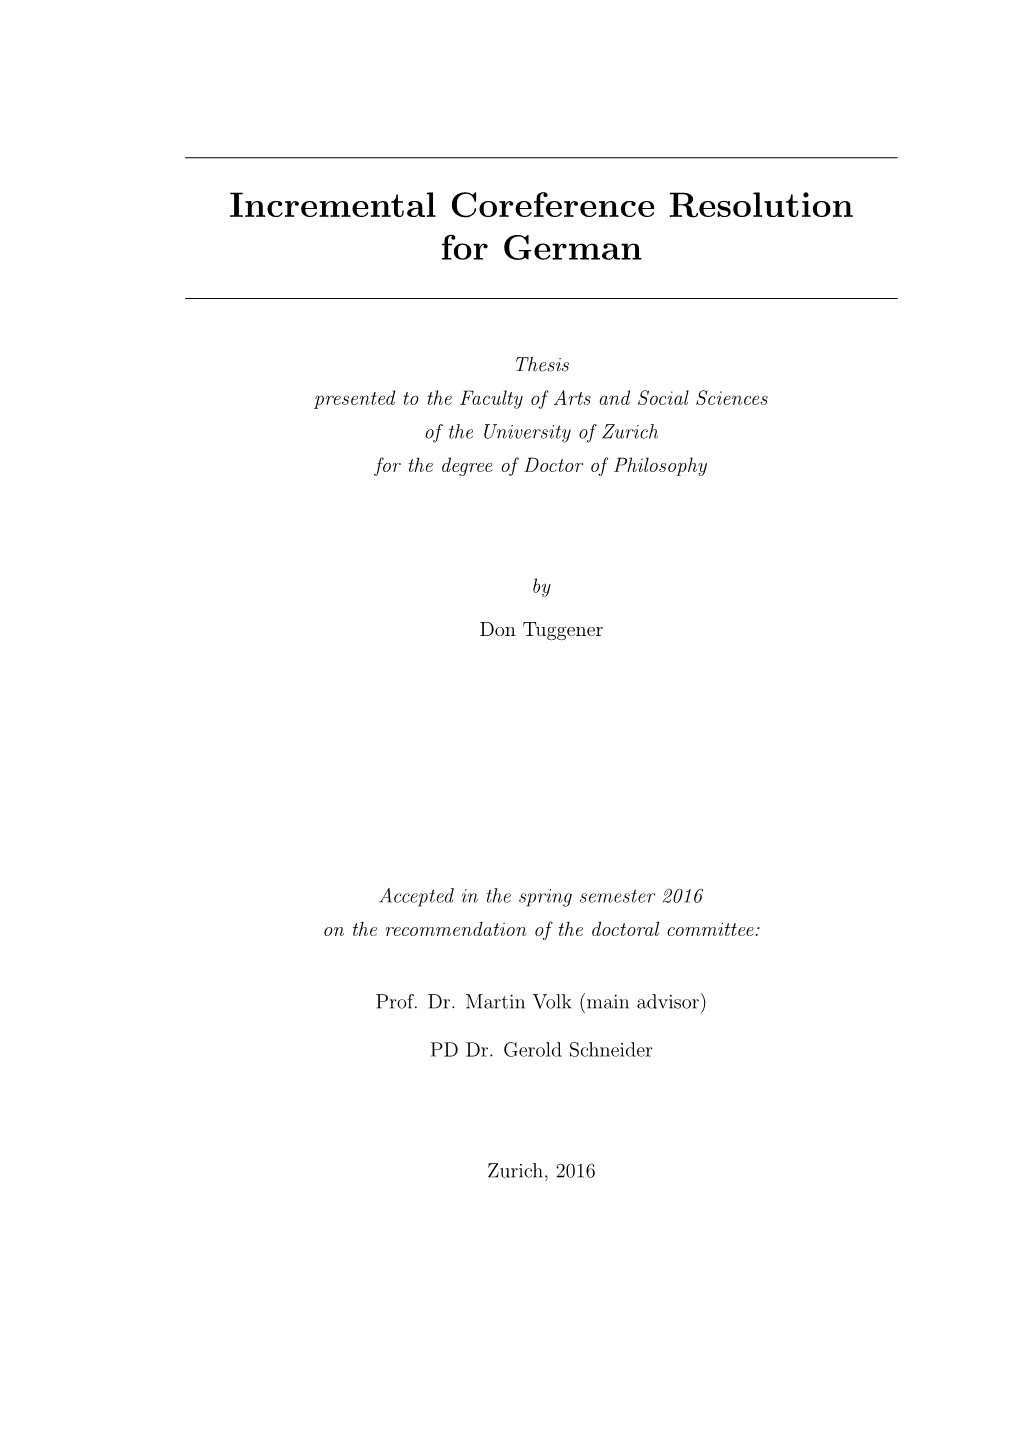 Incremental Coreference Resolution for German